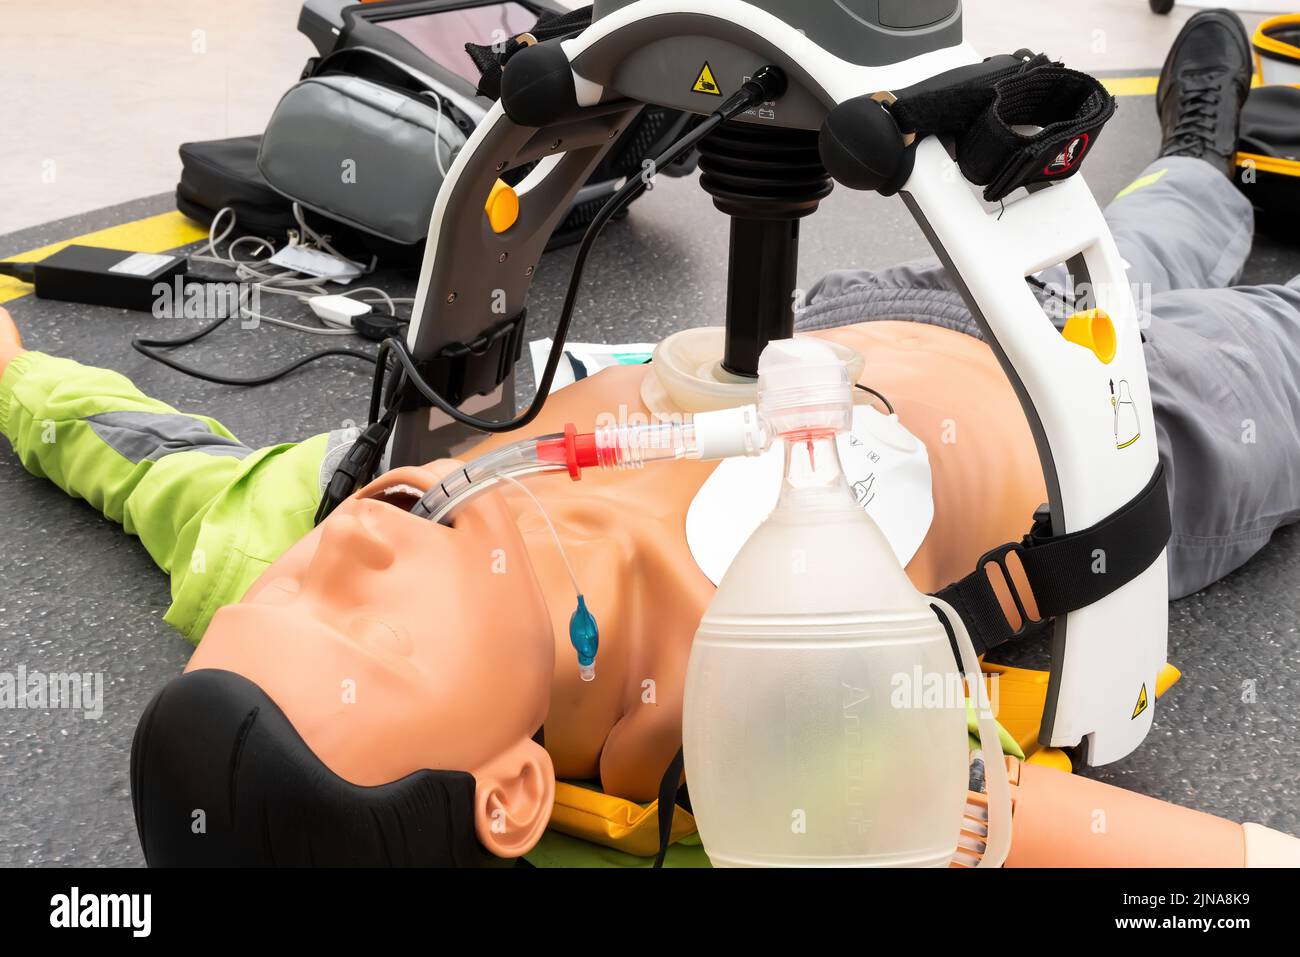 Electronic resuscitation through Rescue Aid by Stryker. Exhibited at the RettMobil trade fair in Fulda, Germany. Stock Photo